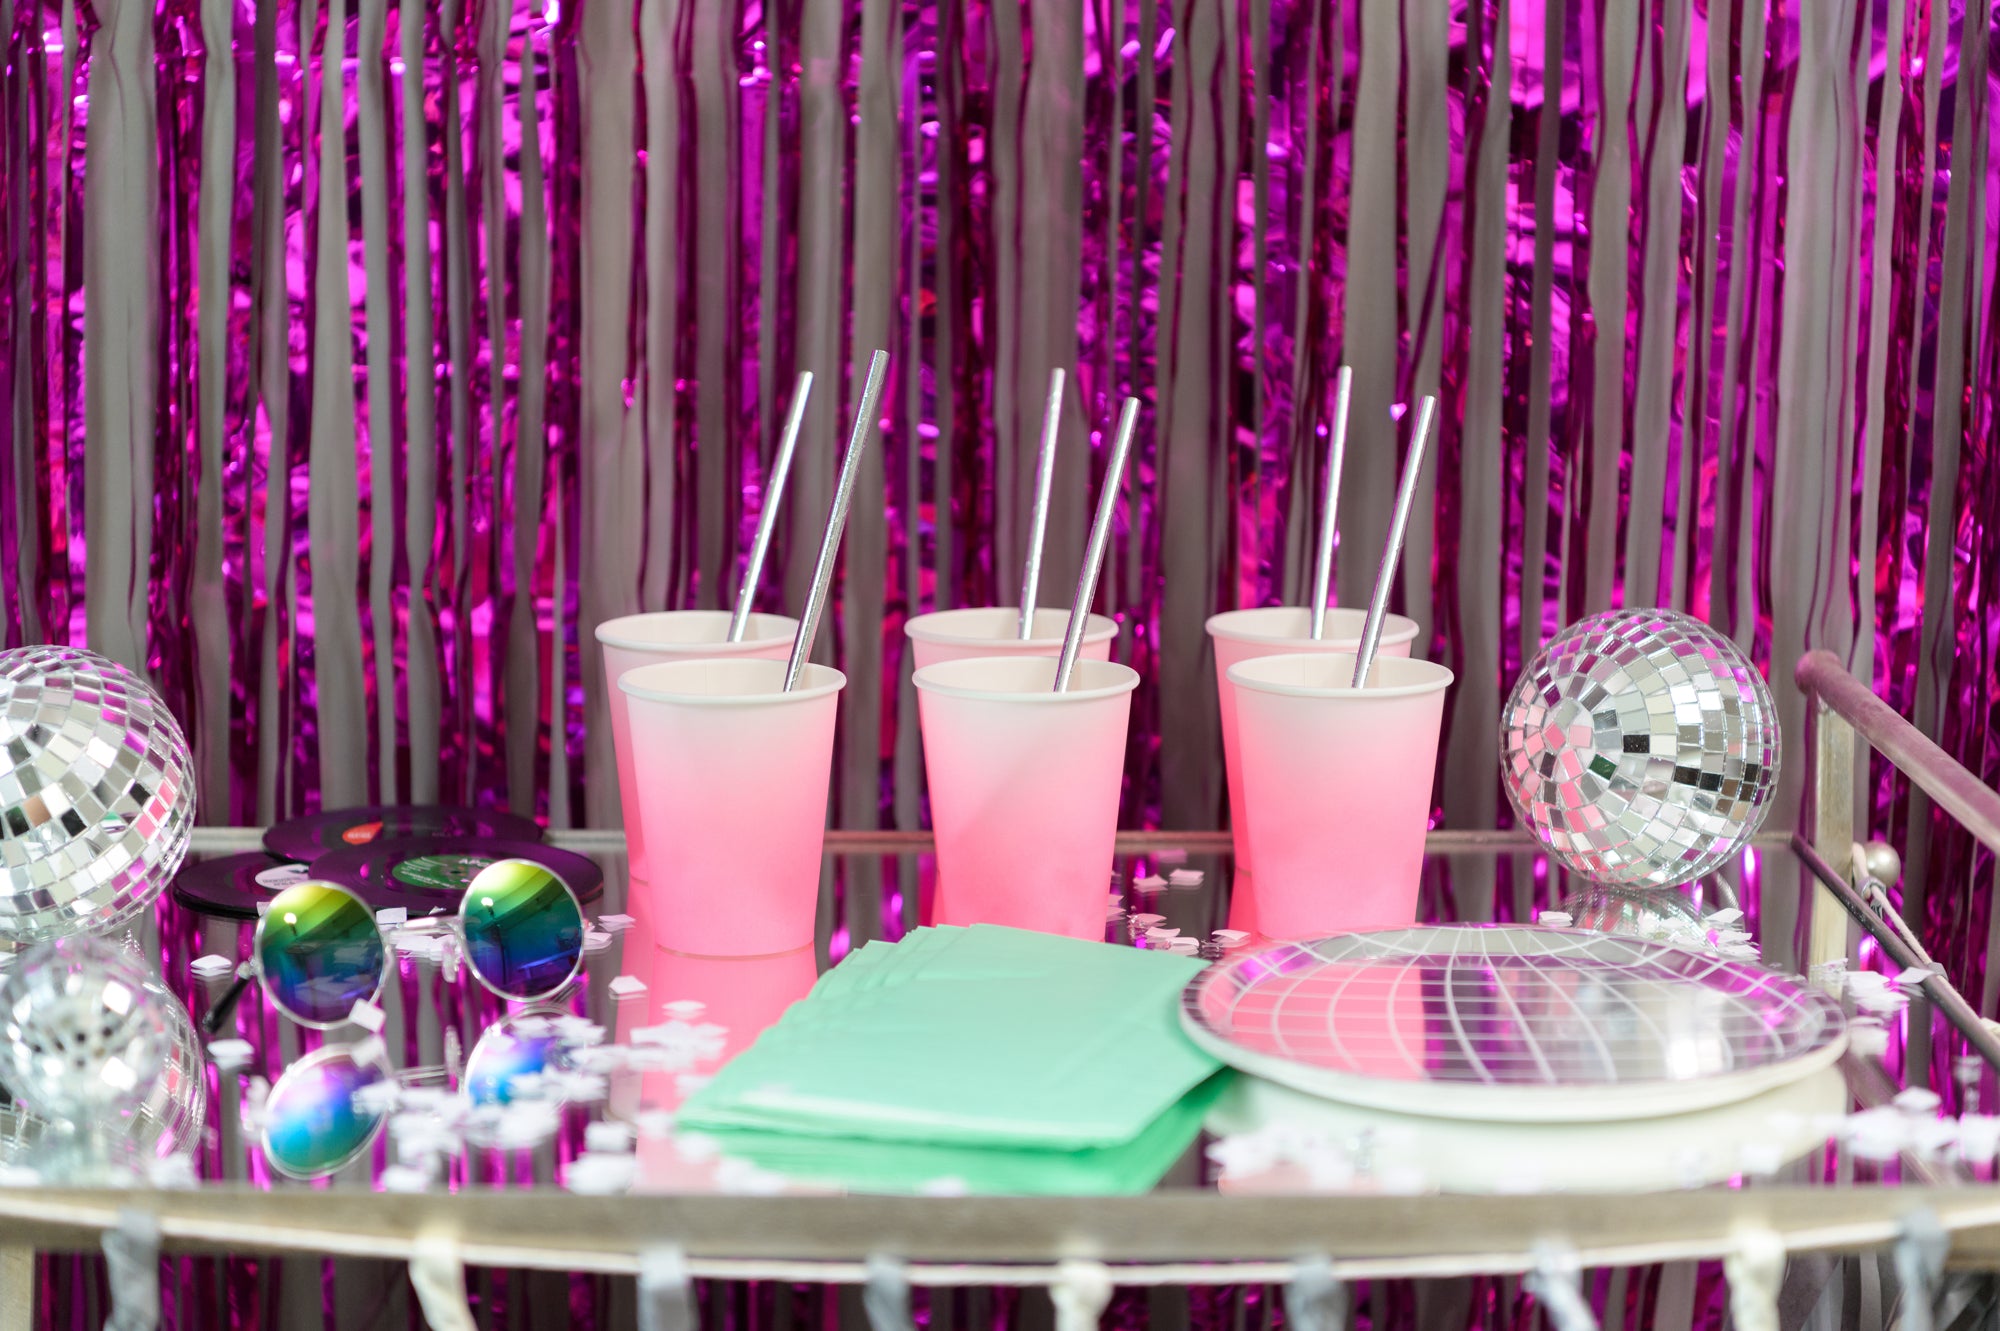 Pink Ombre 8oz Party Cups